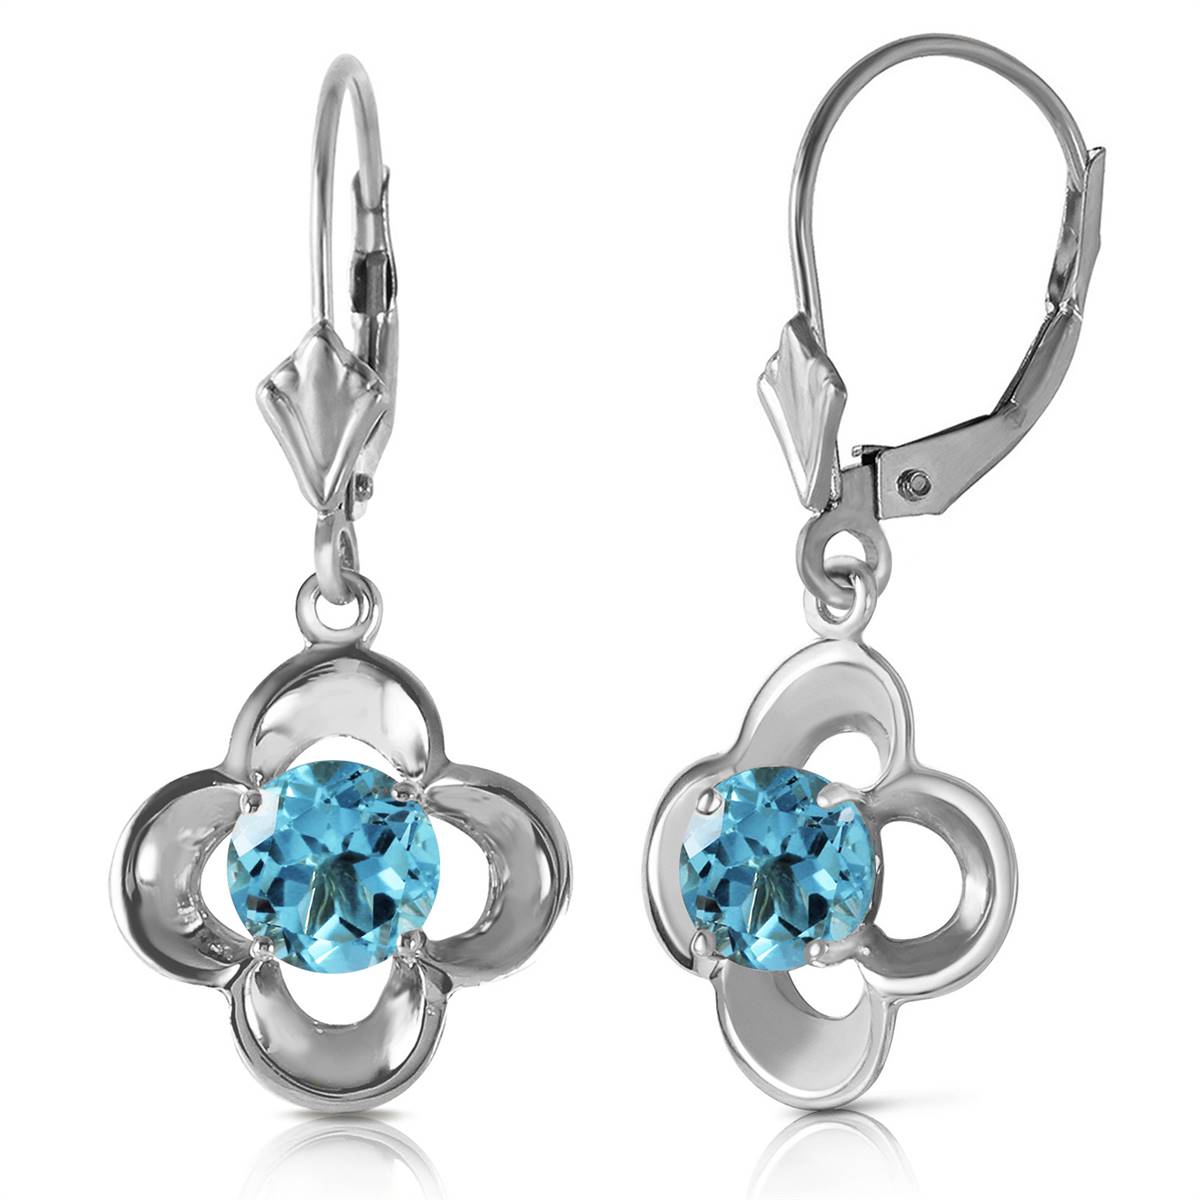 1.1 Carat 14K Solid White Gold Incentive Blue Topaz Earrings